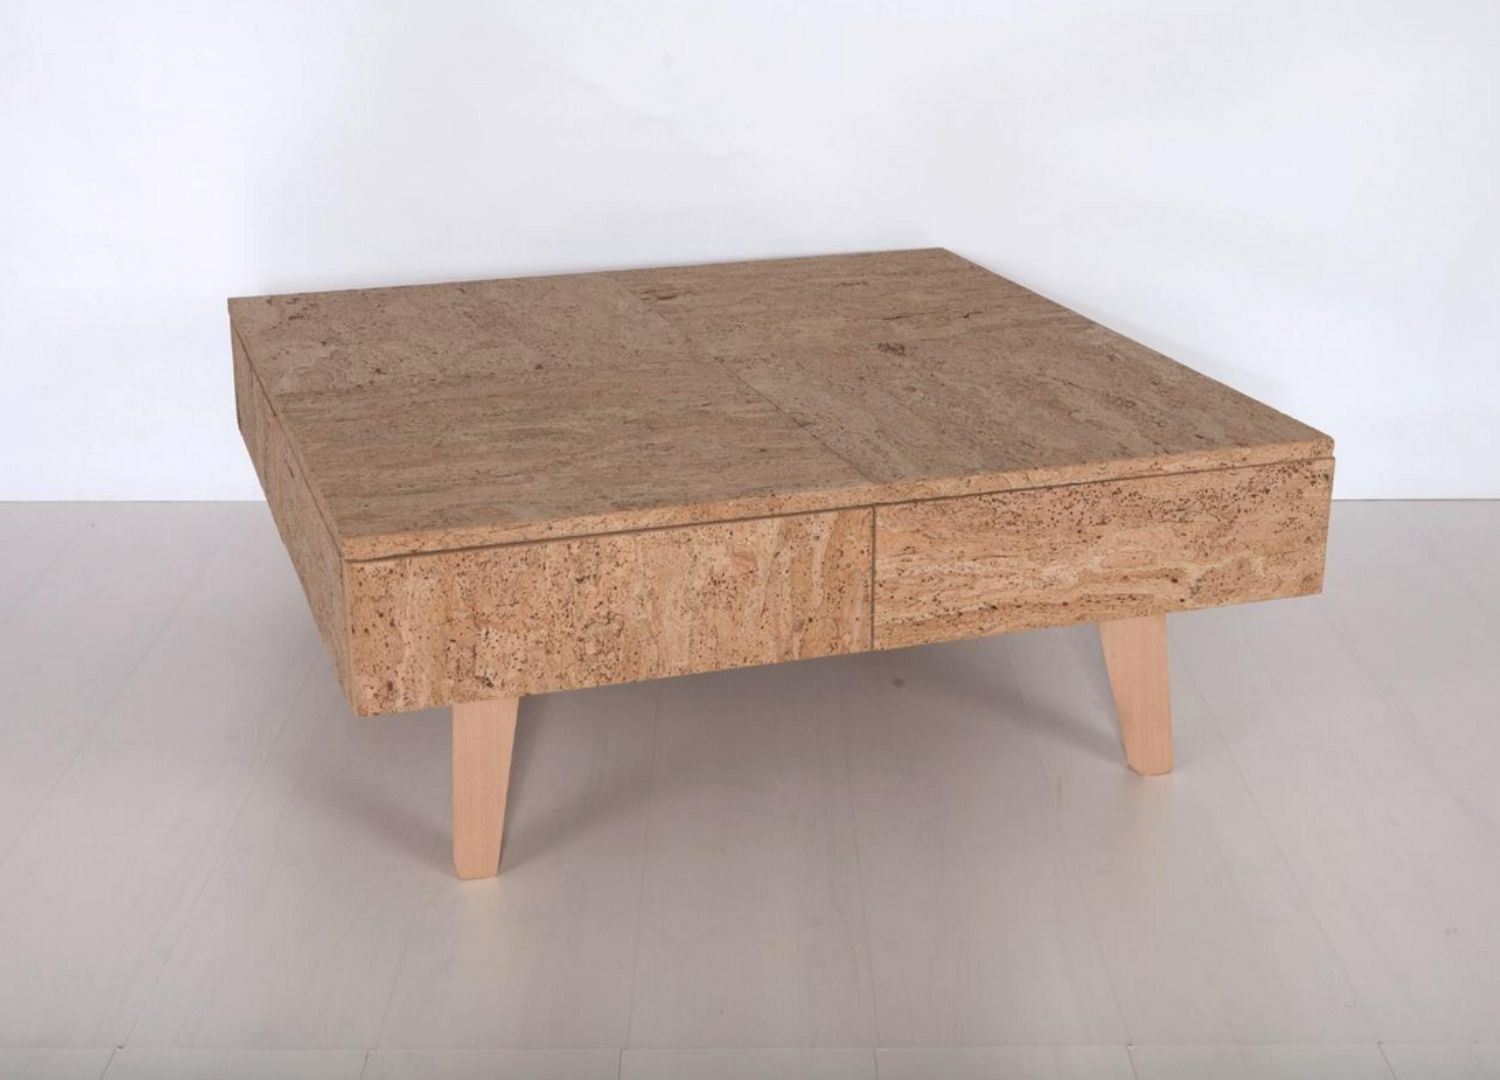 Cork coffee table _ 4 minimalistic cork furniture to soften your space